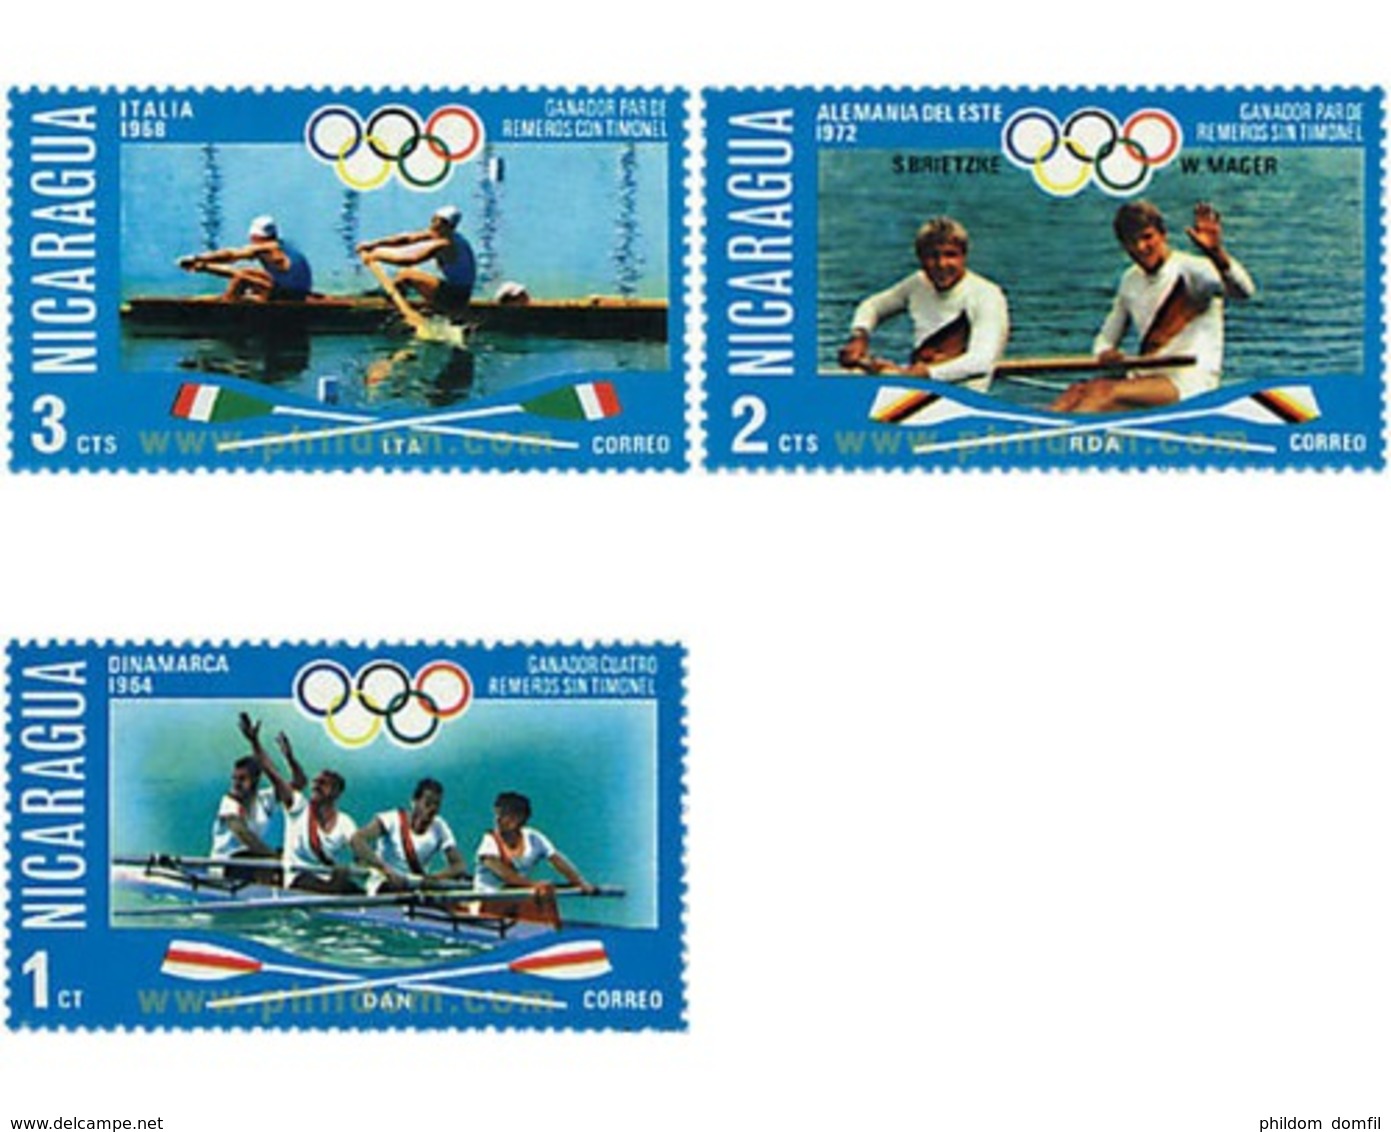 Ref. 304494 * MNH * - NICARAGUA. 1976. GAMES OF THE XXI OLYMPIAD. MONTREAL 1976 . 21 JUEGOS OLIMPICOS VERANO MONTREAL 19 - Sommer 1952: Helsinki